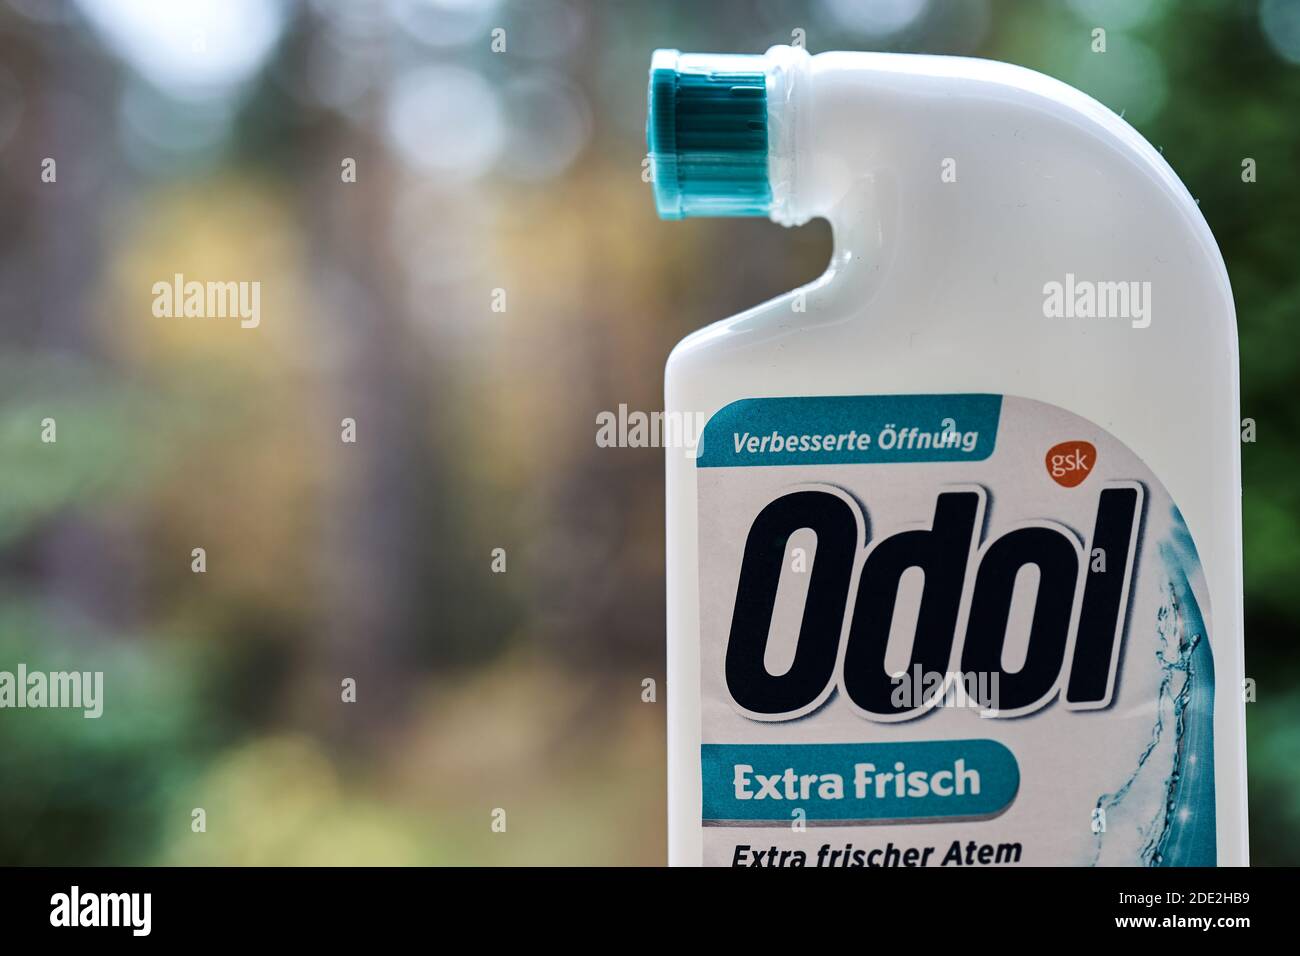 Odol mouthwash for cleaning and disinfecting the oral cavity against bacteria and bad breath in Gifhorn, Germany, November 17, 2020 Stock Photo